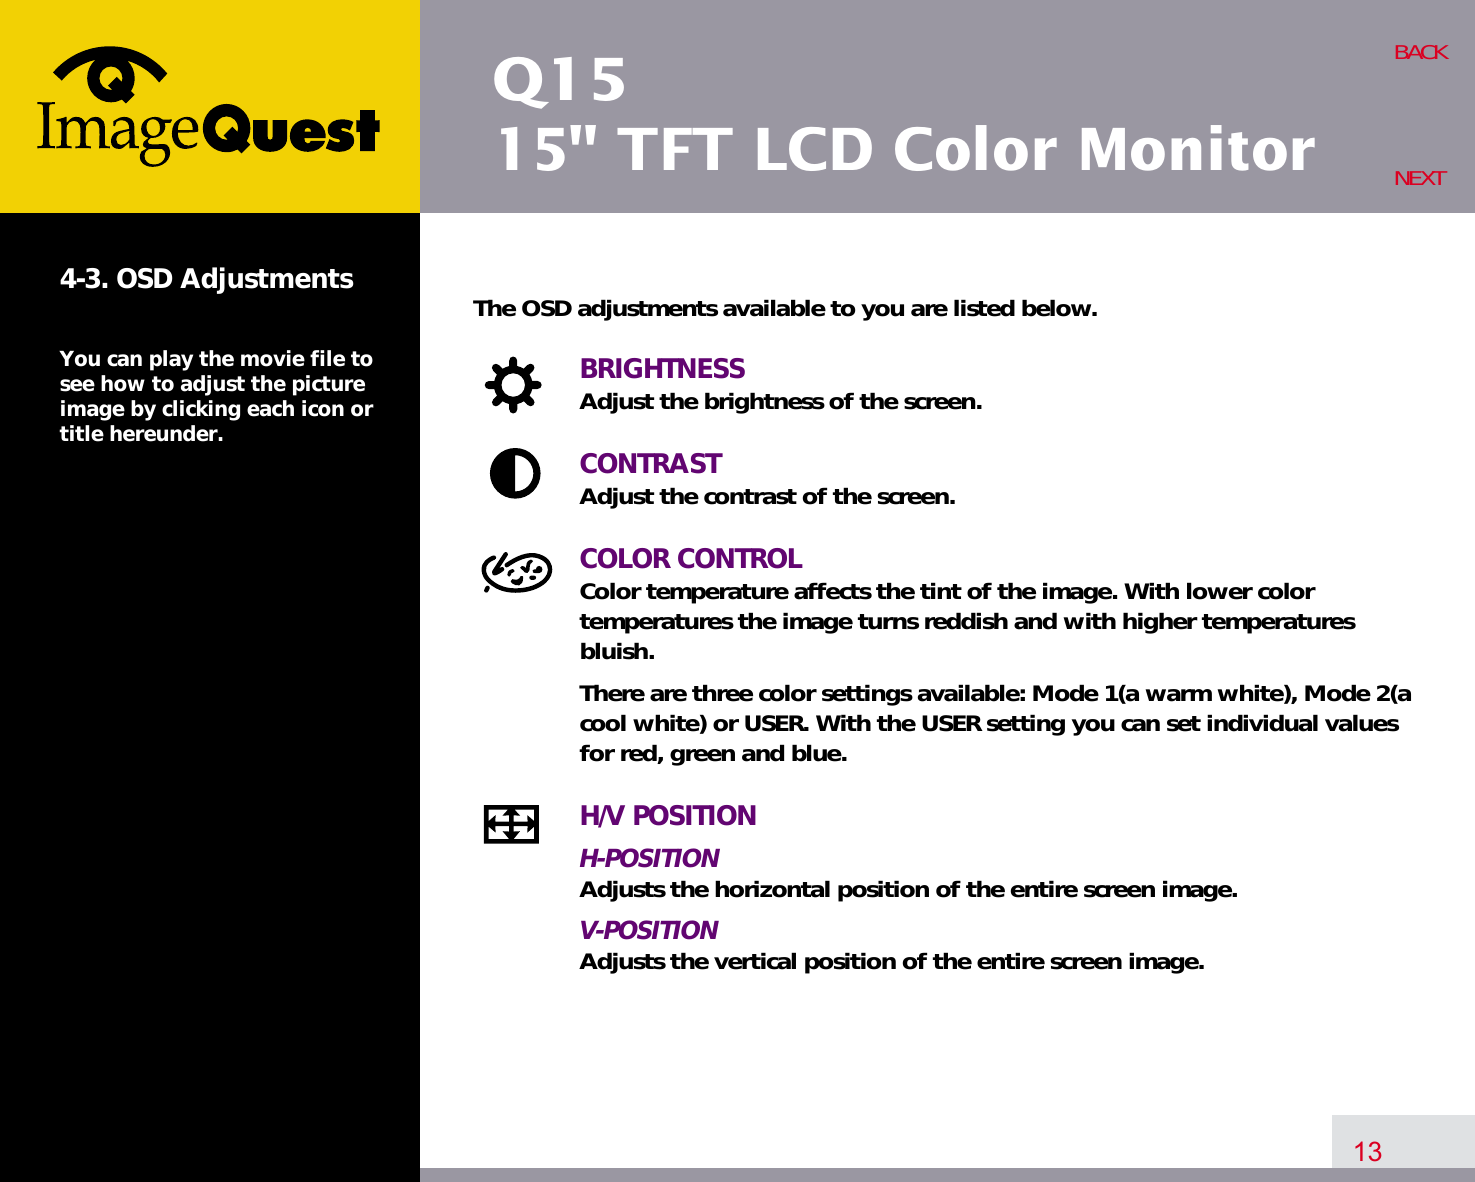 Q1515&quot; TFT LCD Color Monitor13BACKNEXT4-3. OSD AdjustmentsYou can play the movie file tosee how to adjust the pictureimage by clicking each icon ortitle hereunder.The OSD adjustments available to you are listed below.BRIGHTNESSAdjust the brightness of the screen.CONTRASTAdjust the contrast of the screen.COLOR CONTROLColor temperature affects the tint of the image. With lower color temperatures the image turns reddish and with higher temperatures bluish.There are three color settings available: Mode 1(a warm white), Mode 2(acool white) or USER. With the USER setting you can set individual valuesfor red, green and blue.H/V POSITIONH-POSITIONAdjusts the horizontal position of the entire screen image.V-POSITIONAdjusts the vertical position of the entire screen image.